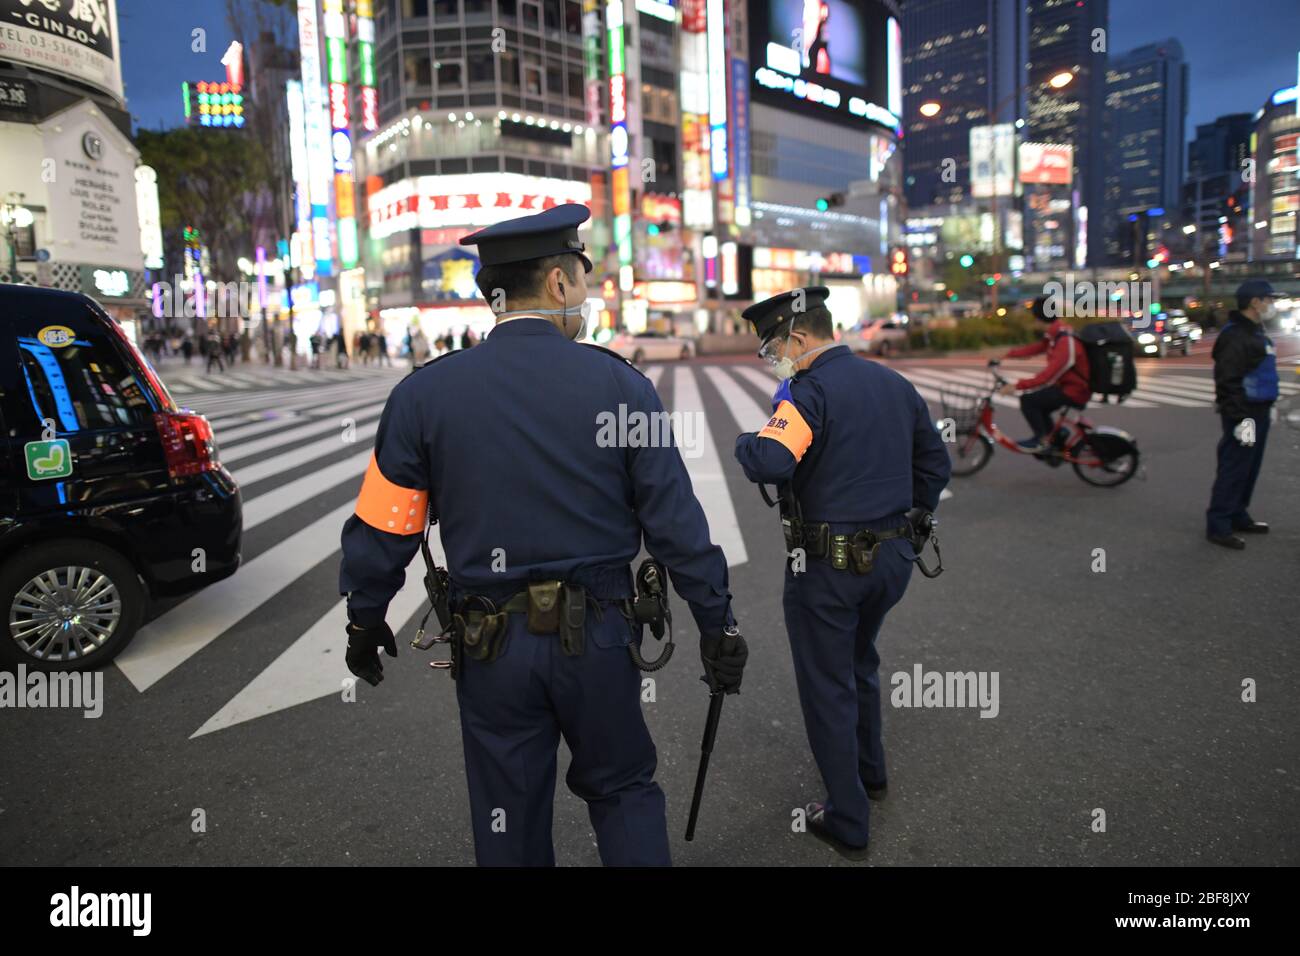 TOKYO, JAPAN - APRIL 17: Police officers watch around the Kabukicho entertainment district amid the coronavirus pandemic on April 17, 2020 in Tokyo. The government of Japan has requested that businesses including schools, athletic facilities, bars and restaurants to temporarily close or operate under reduced hours during Nationwide State of Emergency. The Japanese government decided to expand the current areas under a state of emergency to nationwide, as the Covid-19 coronavirus outbreak continues to spread throughout the country. Credit: Aflo Co. Ltd./Alamy Live News Stock Photo